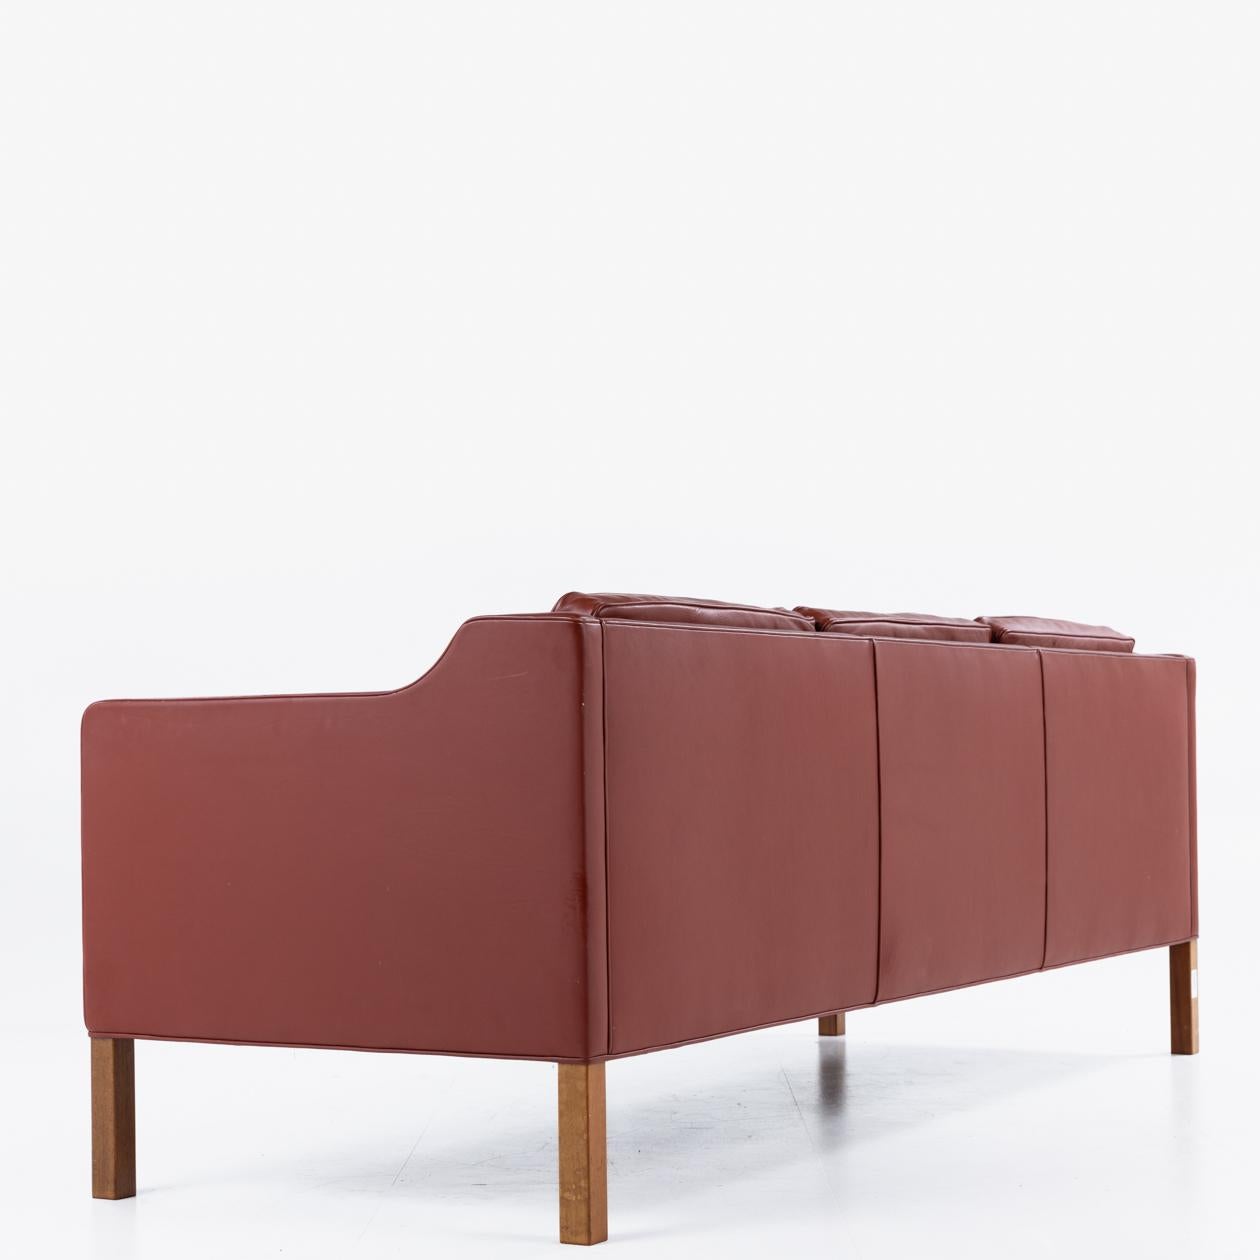 BM 2213 three seater in patinated red leather and legs in mahogany. Børge Mogensen / Fredericia Furniture